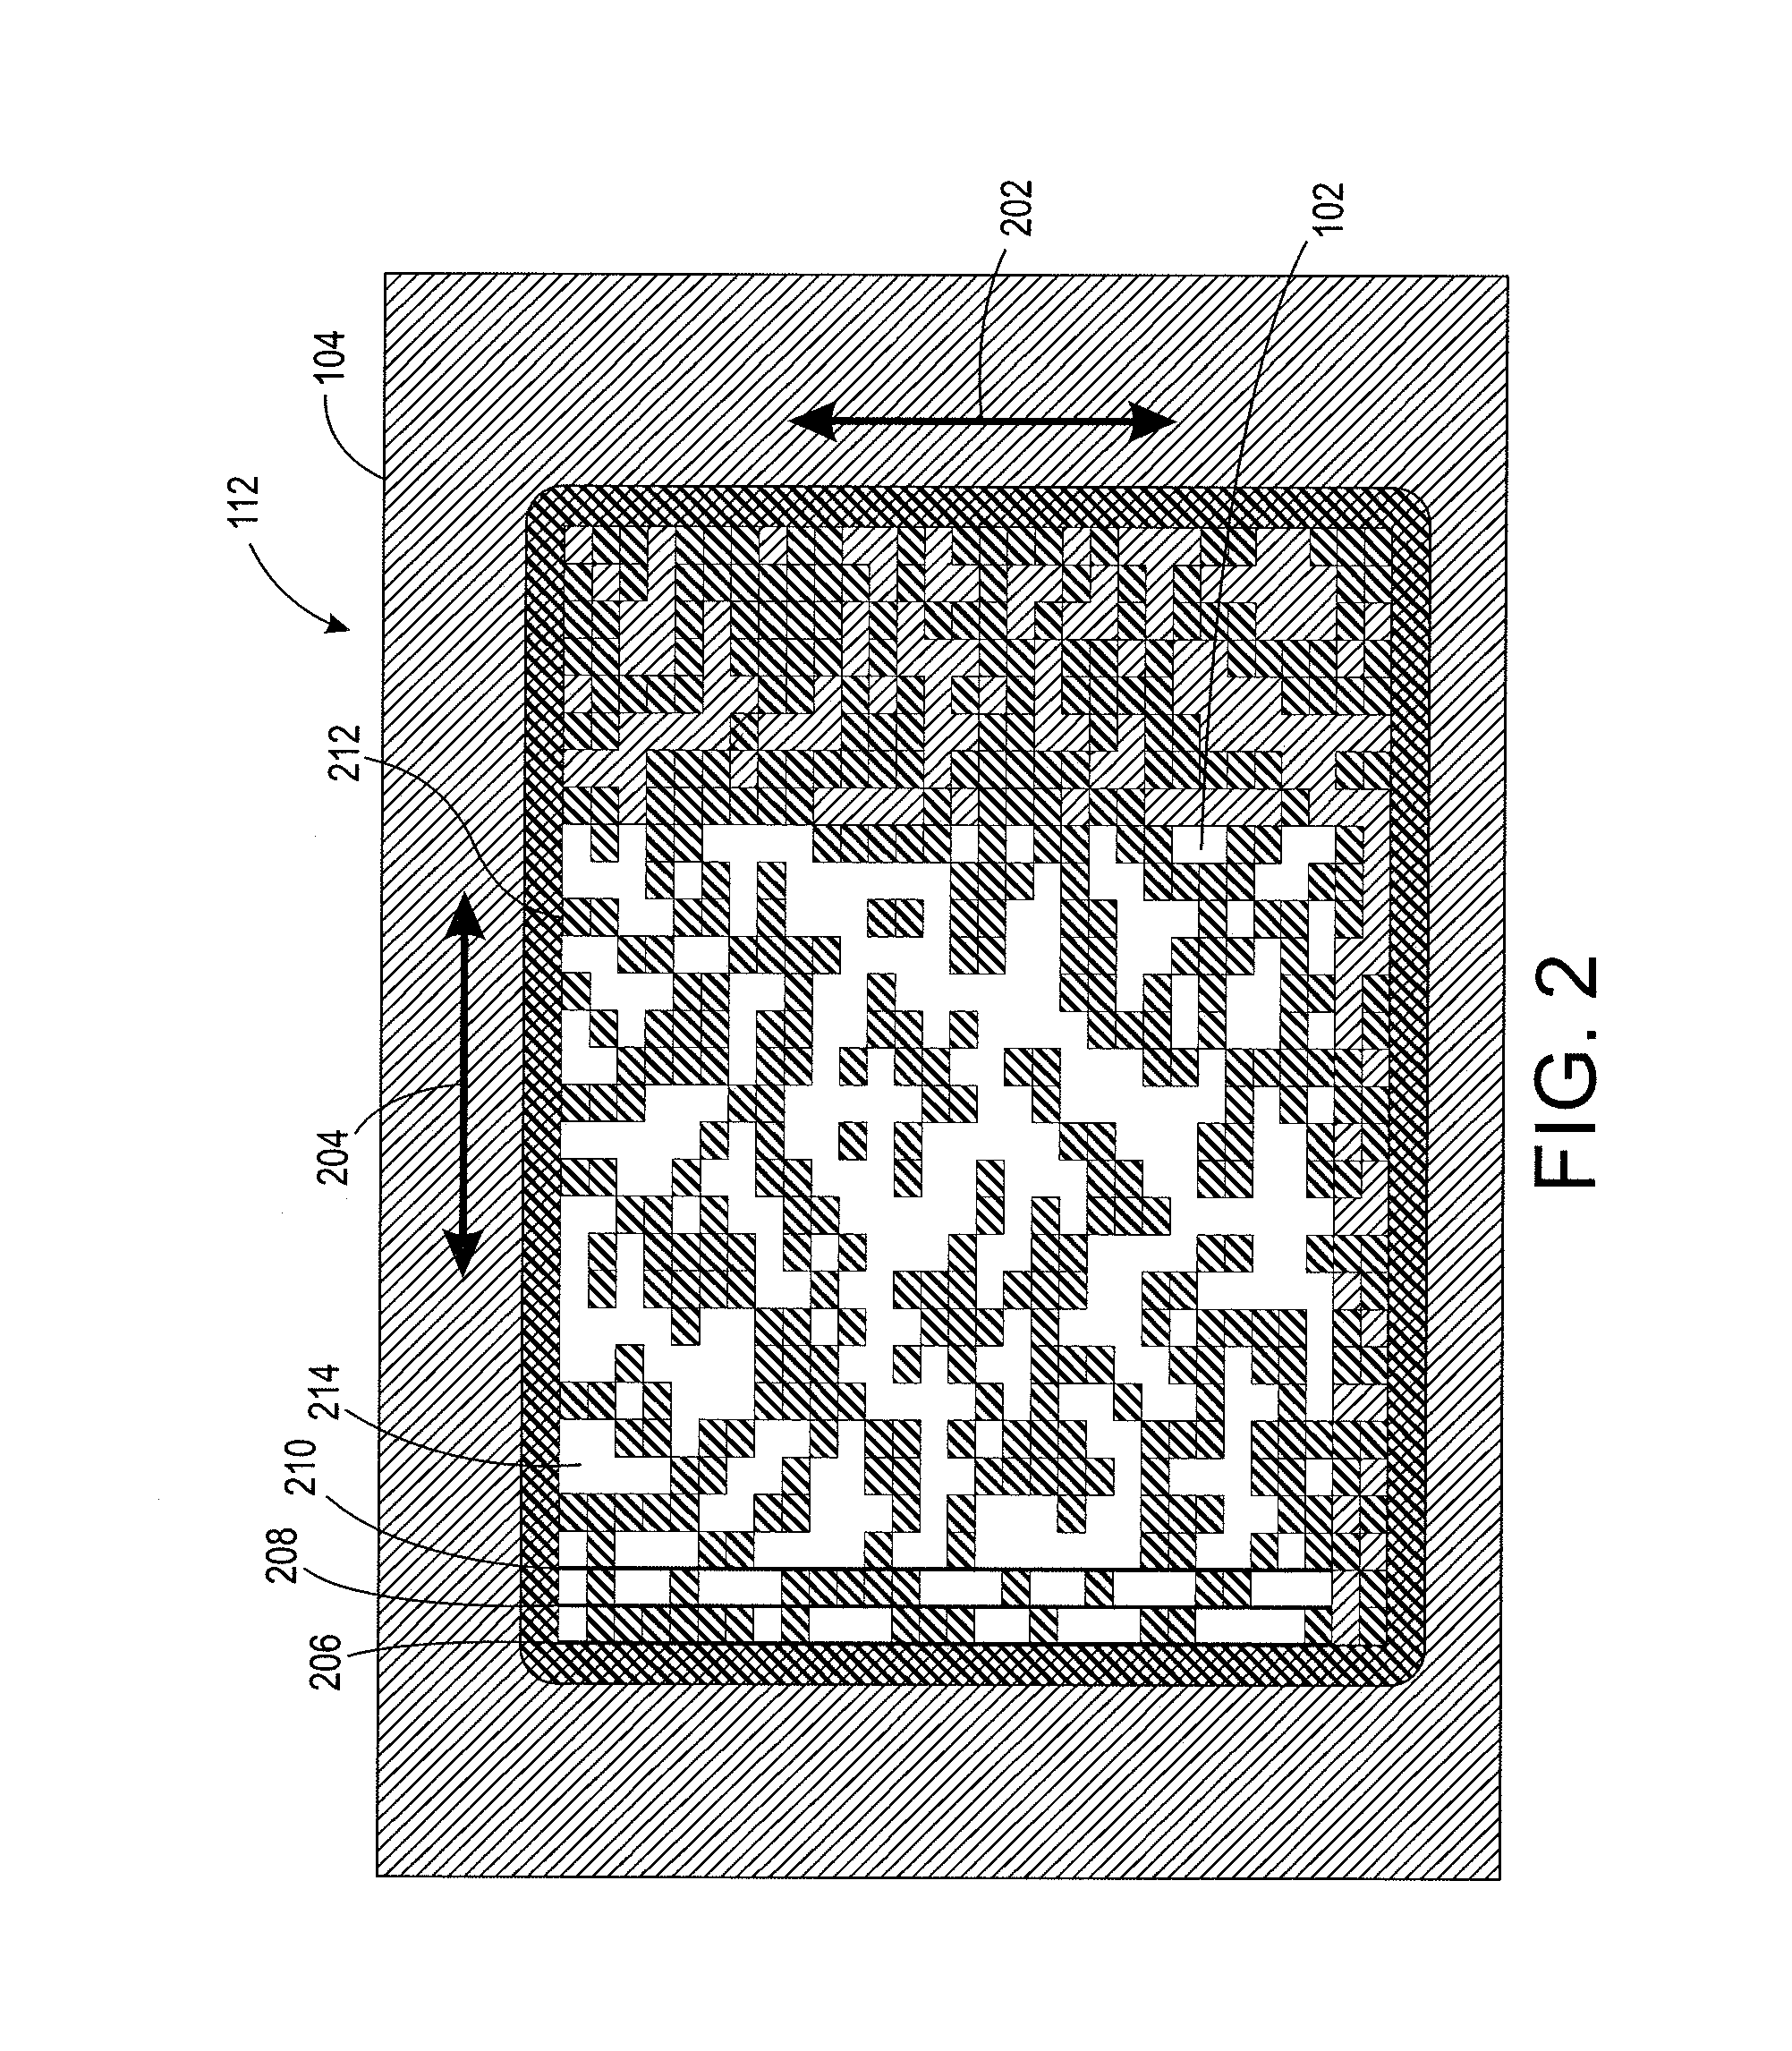 Method and apparatus for compressive imaging of a scene using a single pixel camera